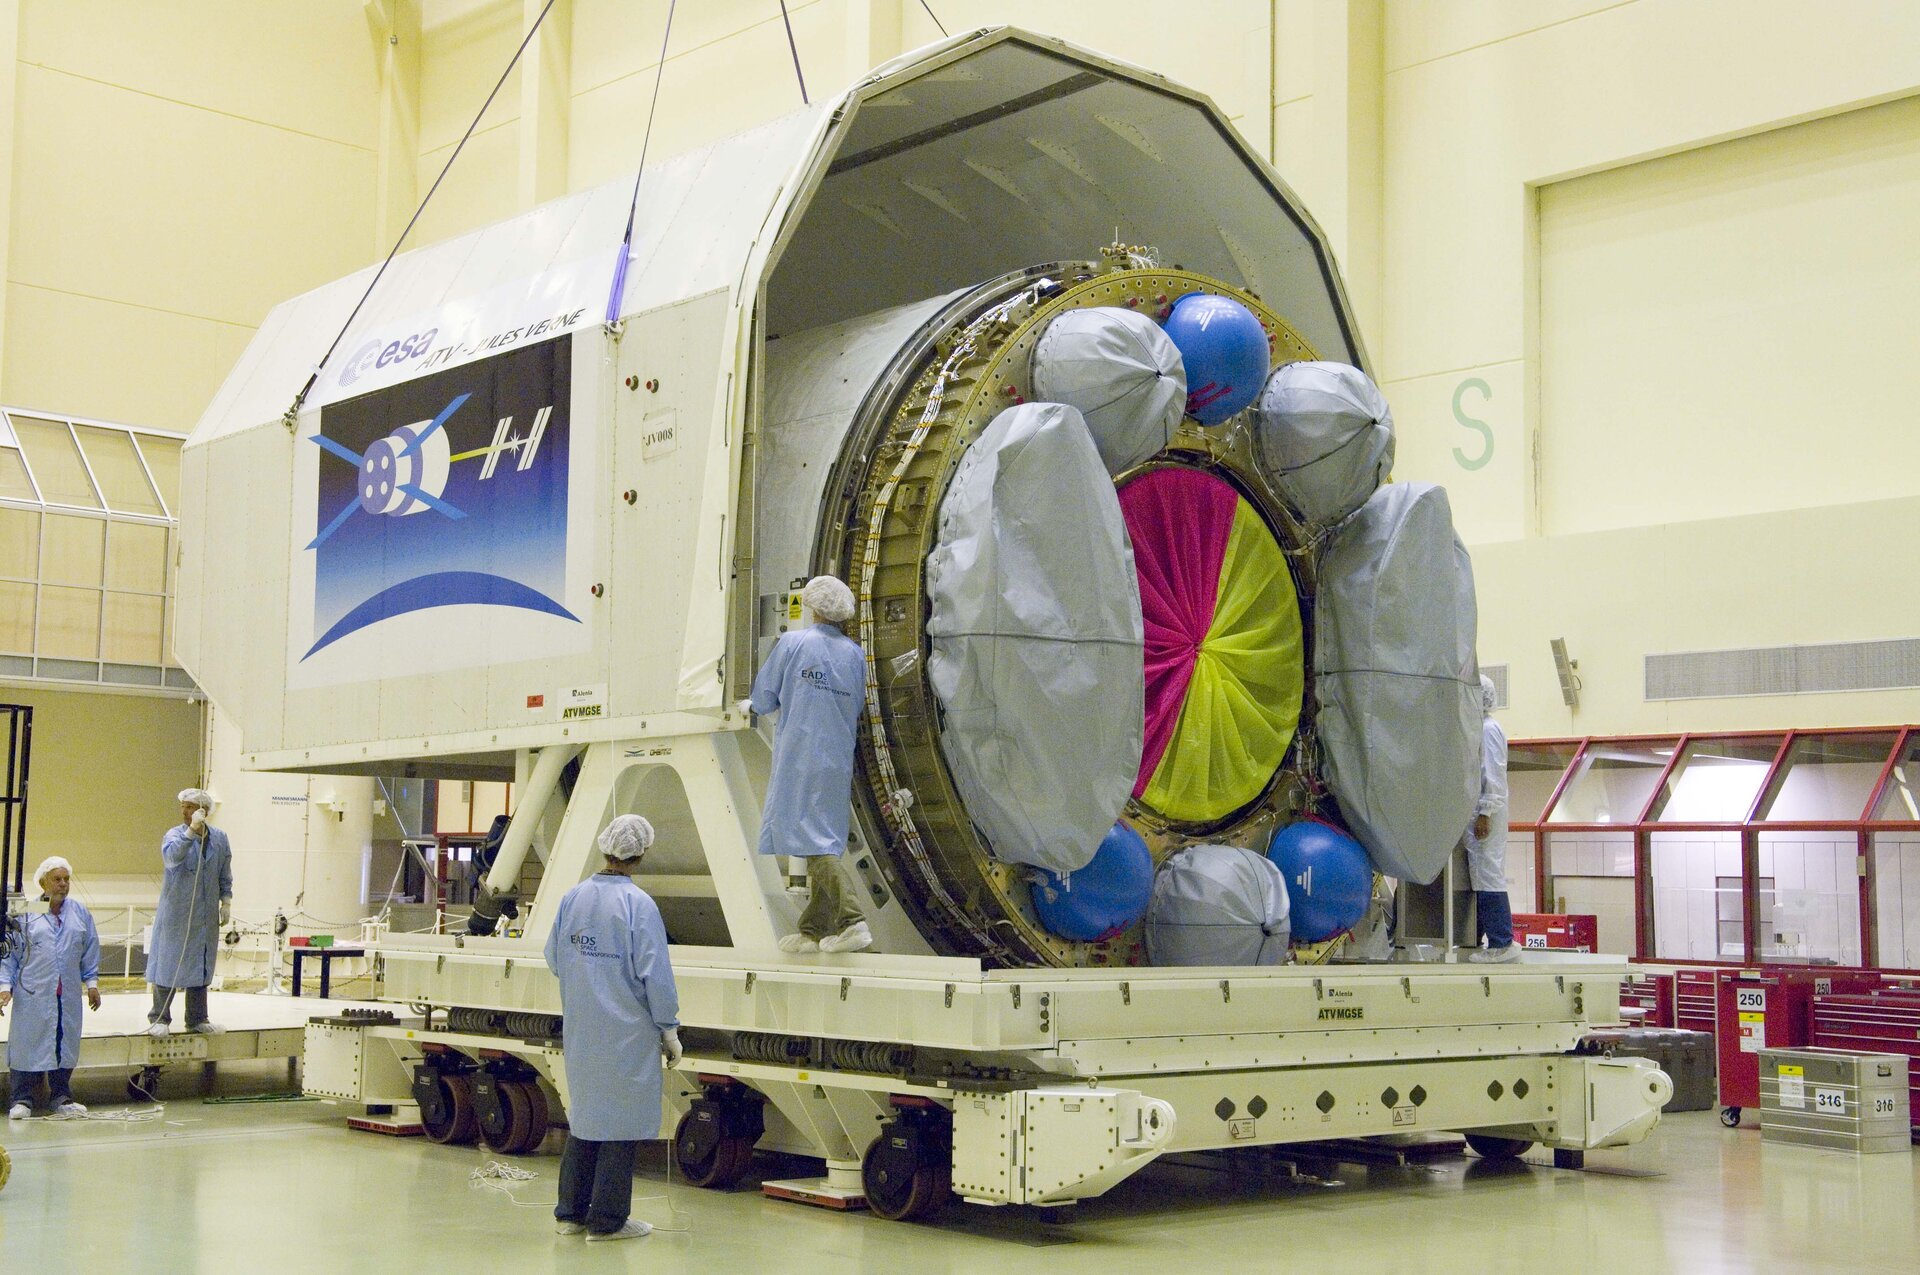 Each section of the spacecraft is carefully packed in a special transport container